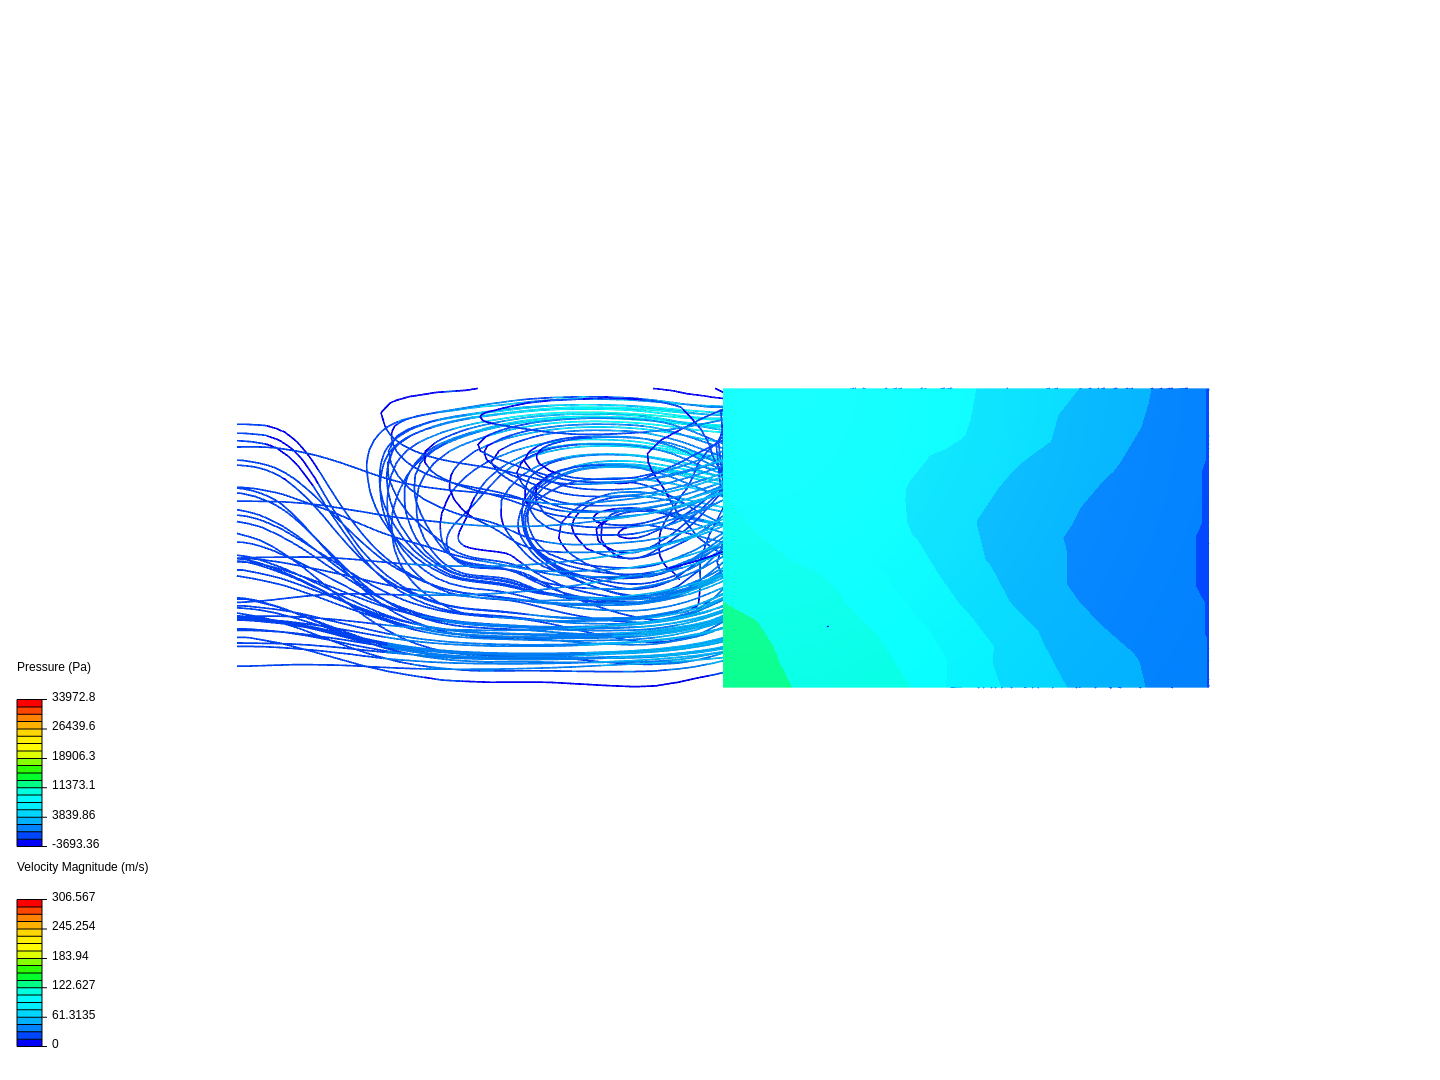 wing cfd 2 image